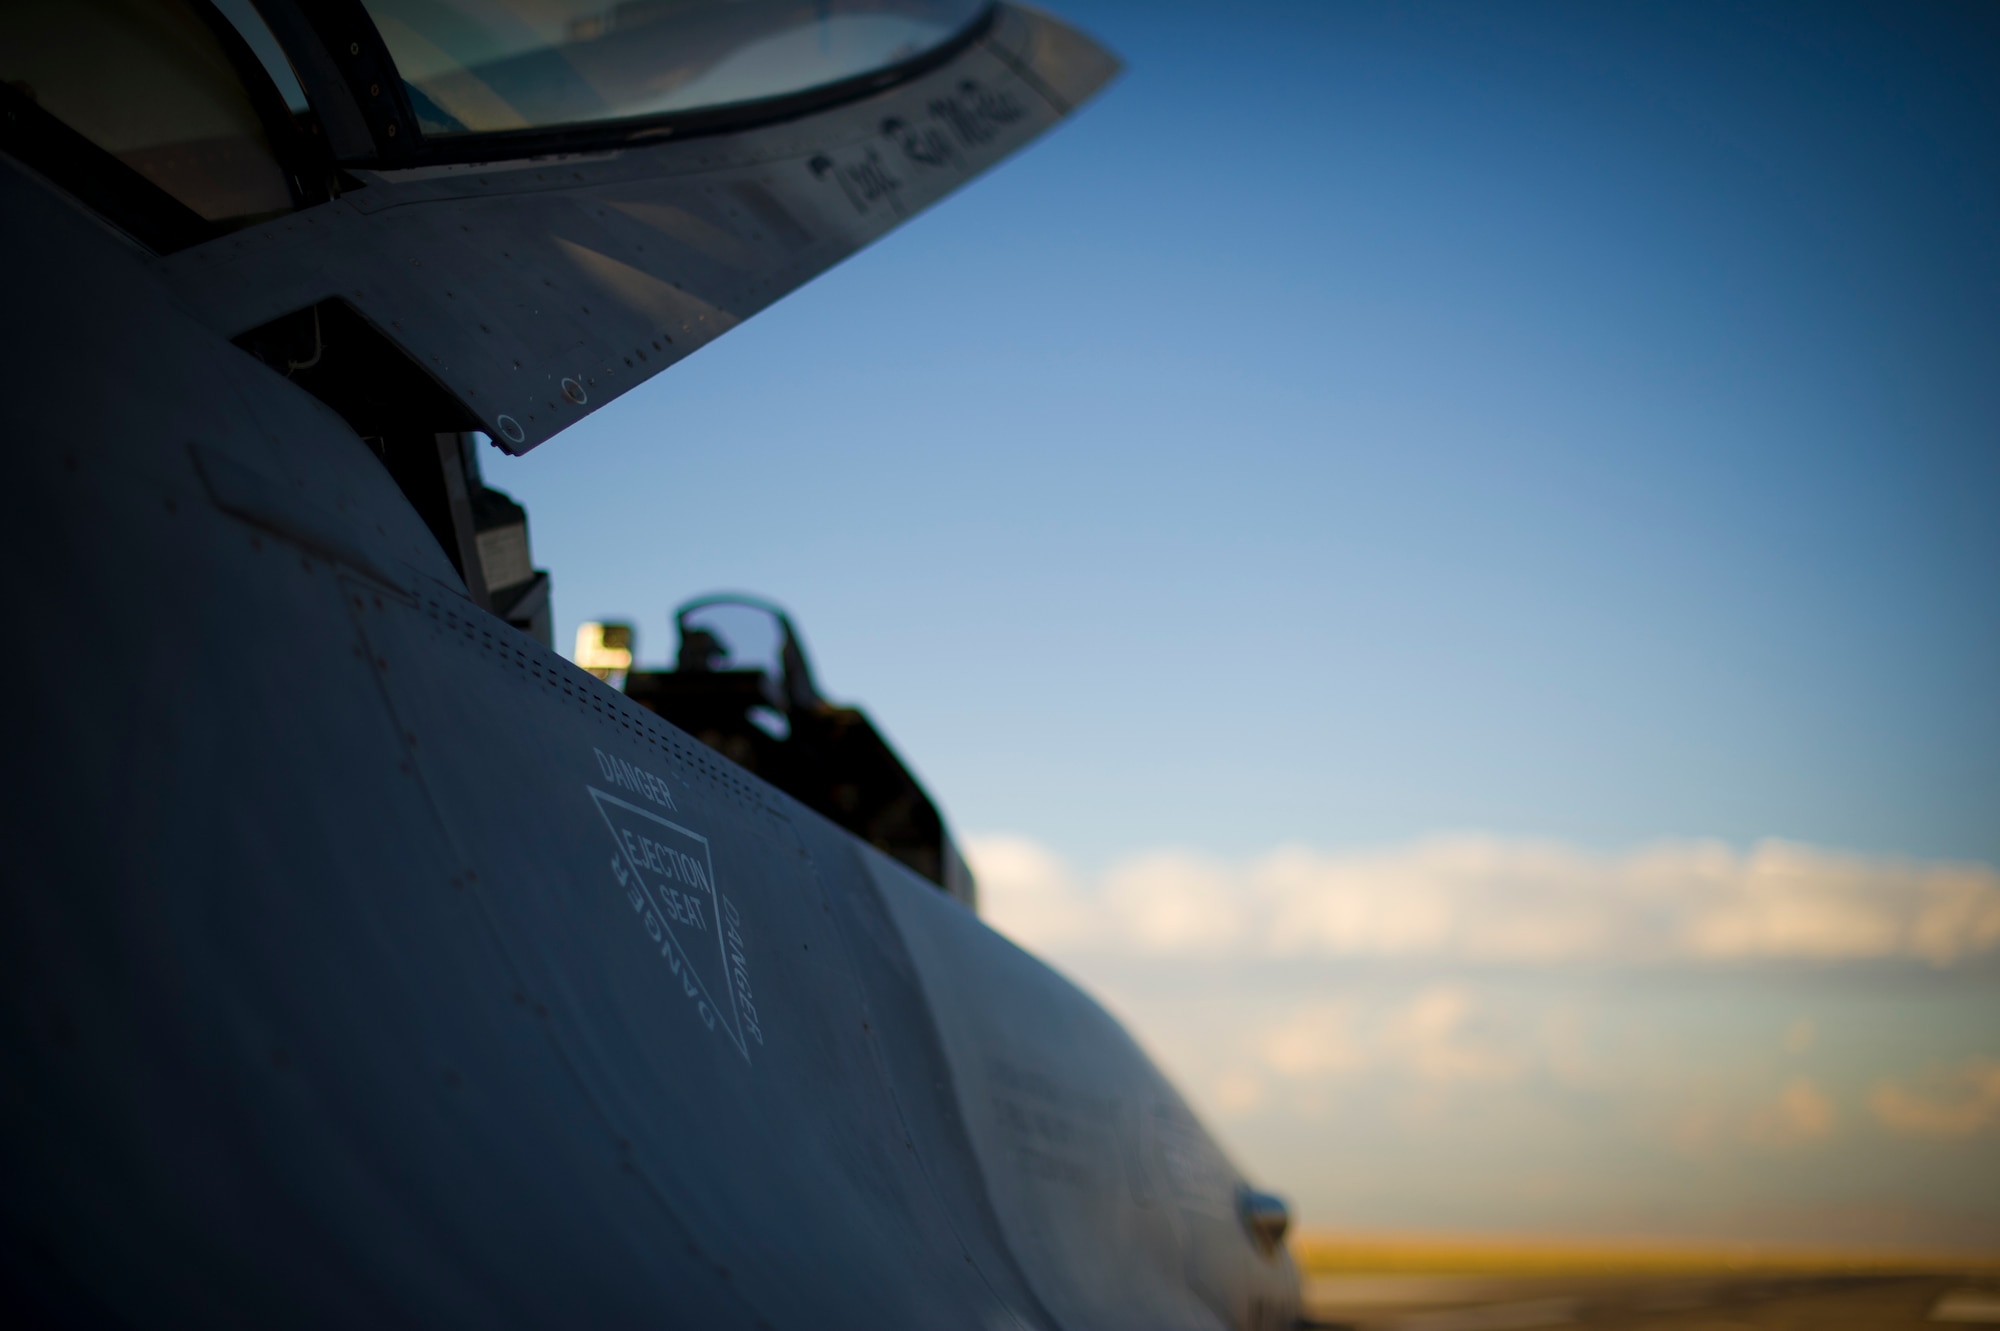 A QF-16 is prepared for takeoff during an unmanned live fire exercise at Holloman Air Force Base, N.M., June 25. A QF-16 took part in an operational live fire exercise as part of the aircrafts test flight program before the beginning of production at the Boeing facility in Cecil Field, Jacksonville, Fla. in late 2014. (U.S. Air Force photo by Airman 1st Class Aaron Montoya / Released)